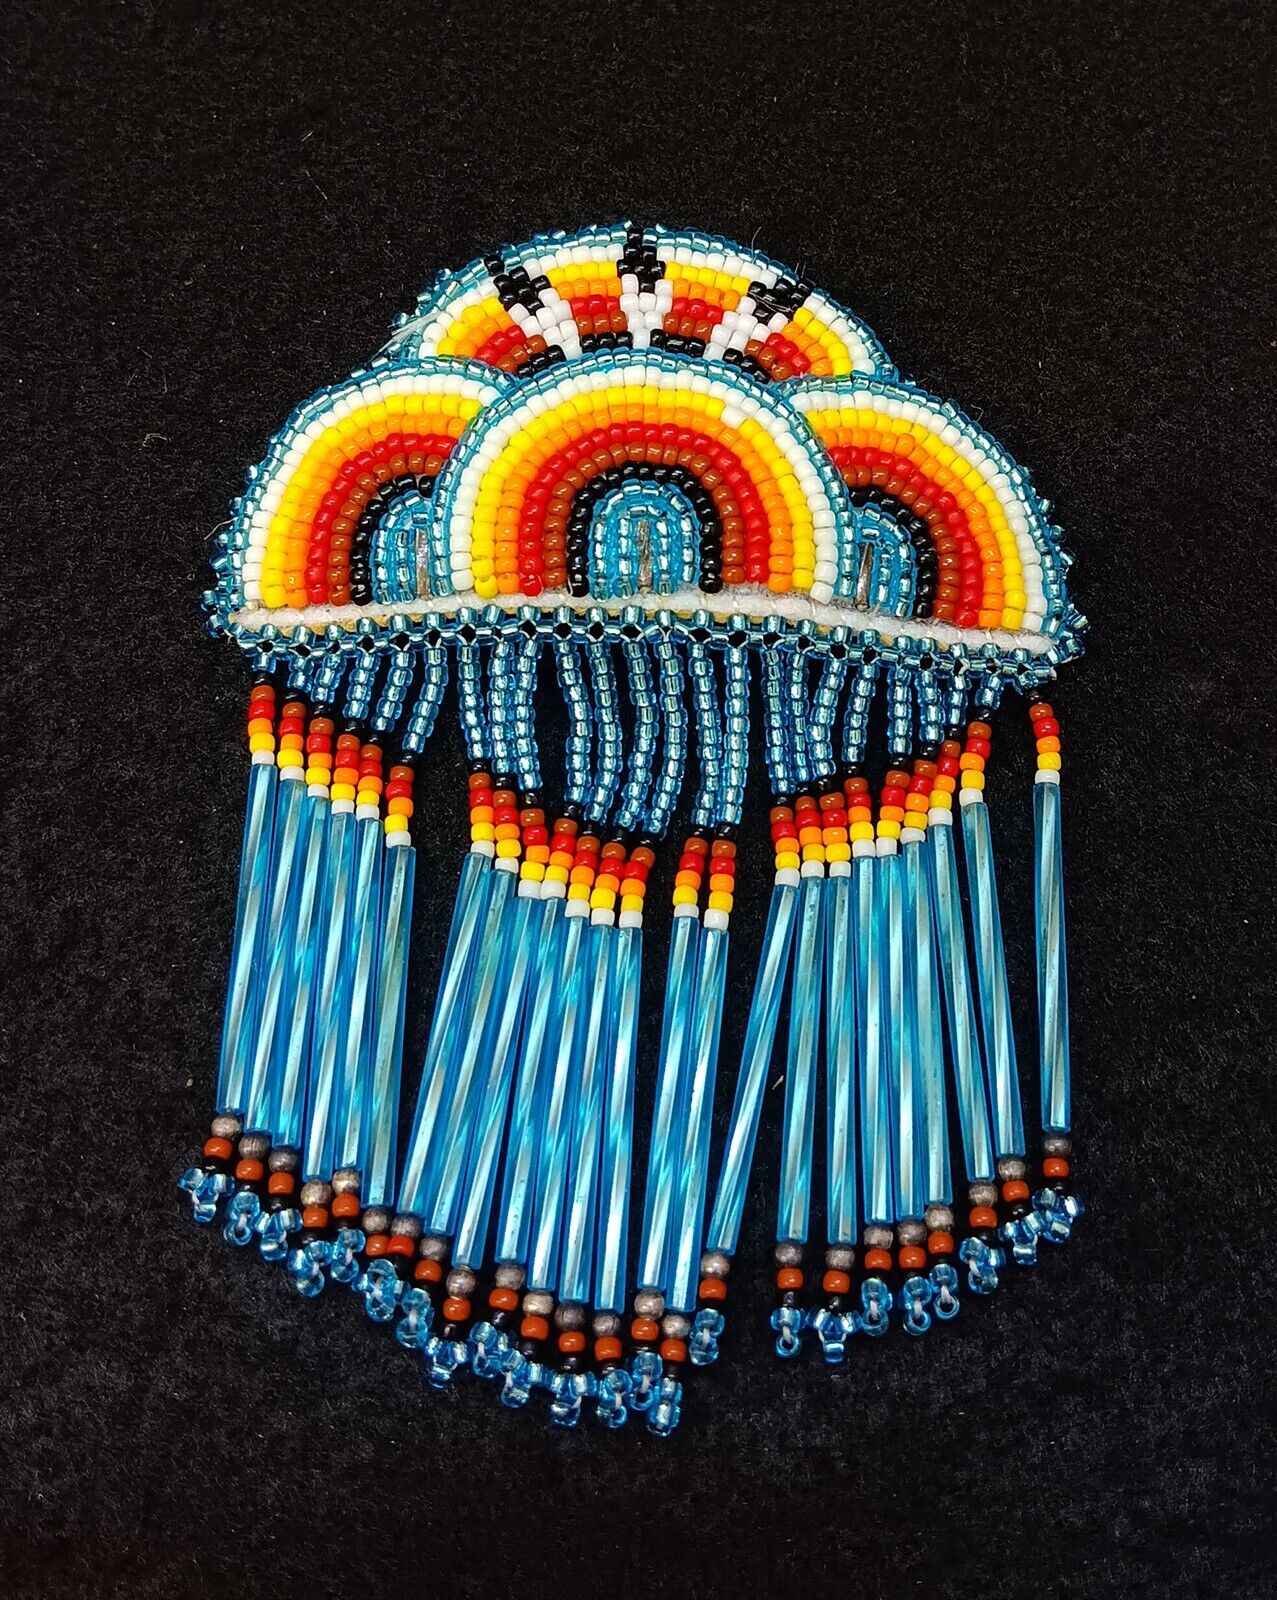 NICE HAND CRAFTED BEADED CLOUD DESIGN FRINGED NATIVE AMERICAN INDIAN BARRETTE